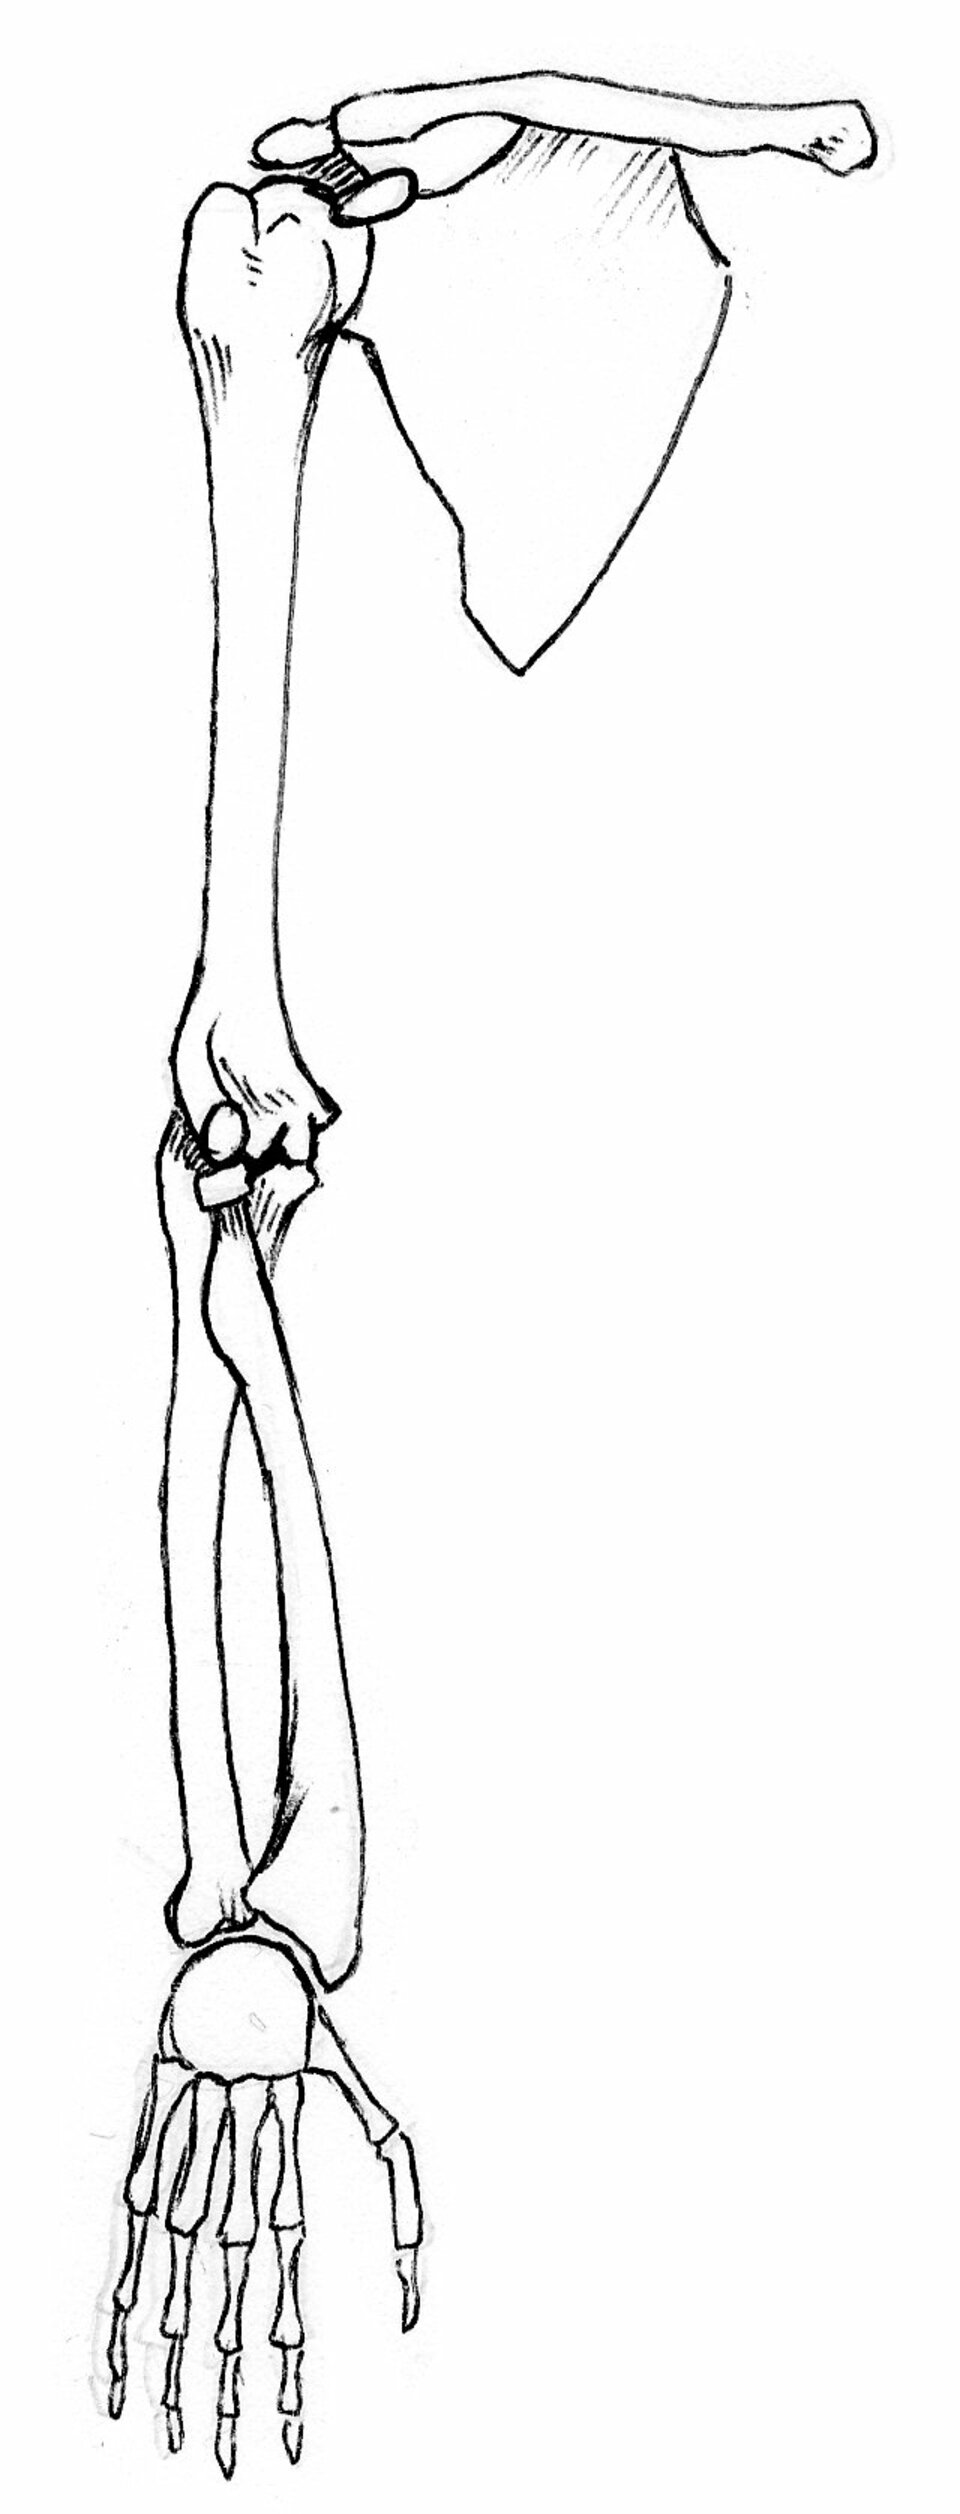 front view of bones of right arm, pronated